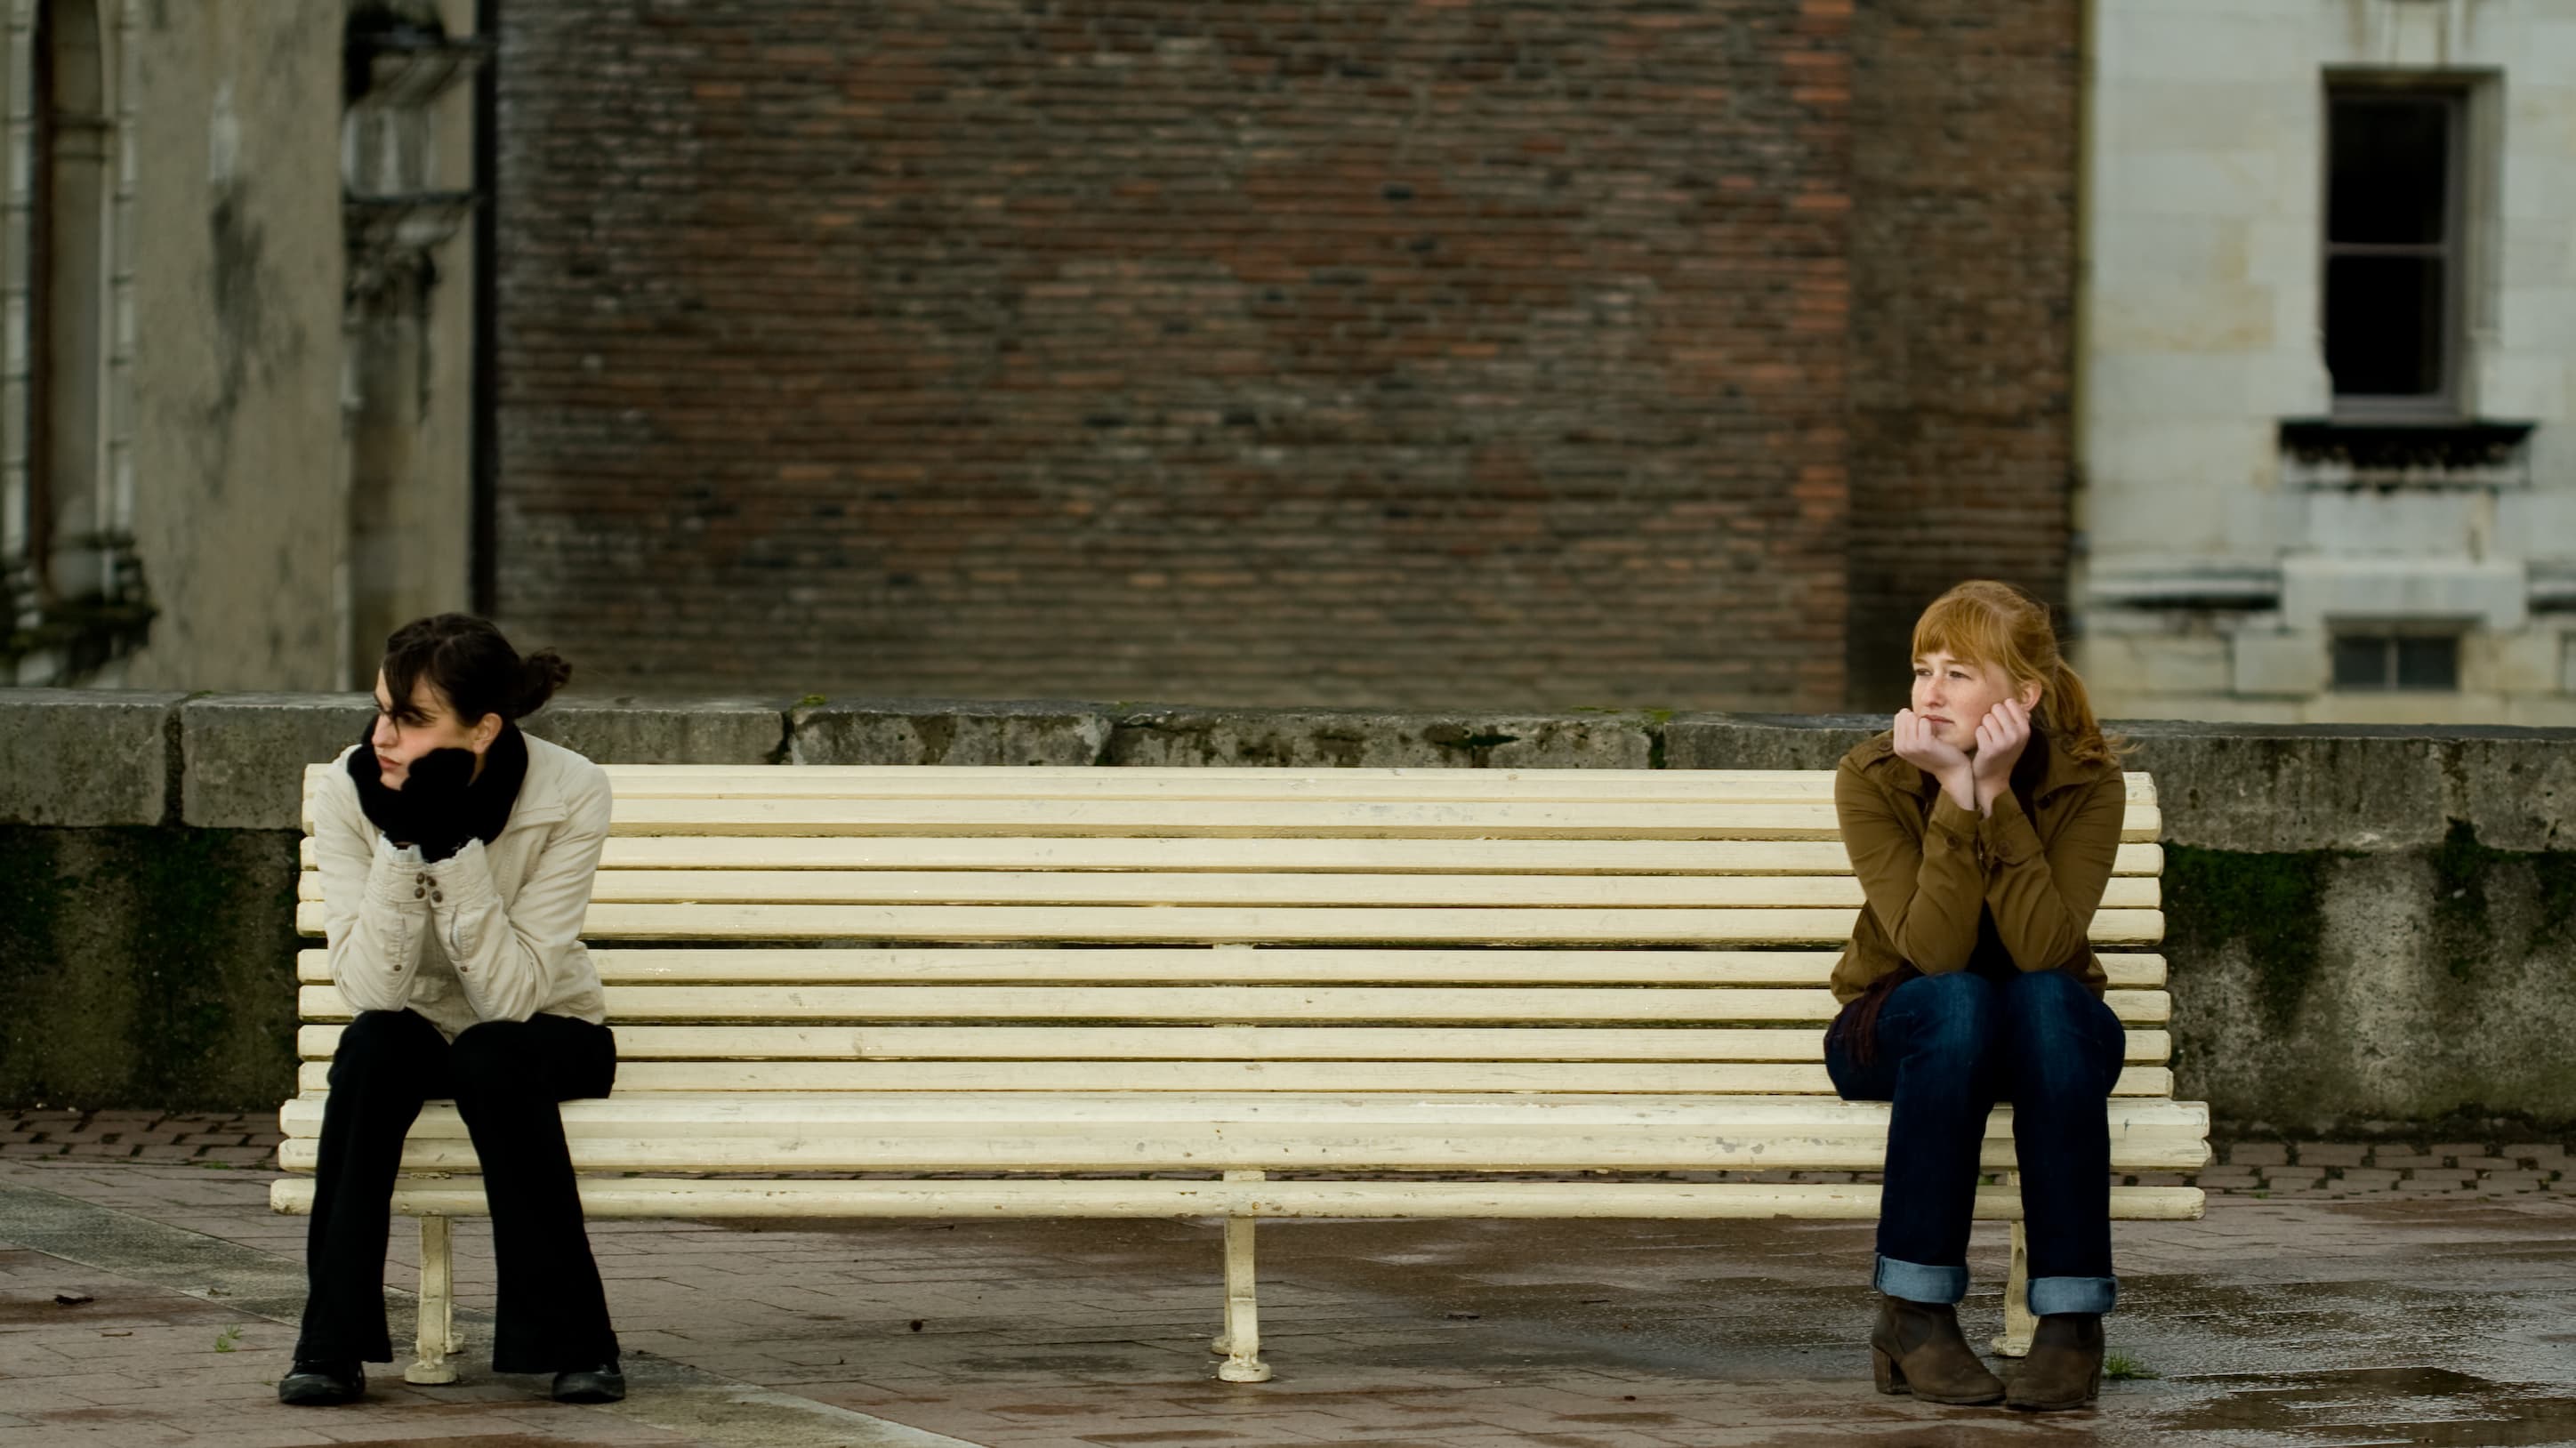 two girls on opposite sides of a bench, practicing social distancing during COVID-19 pandemic